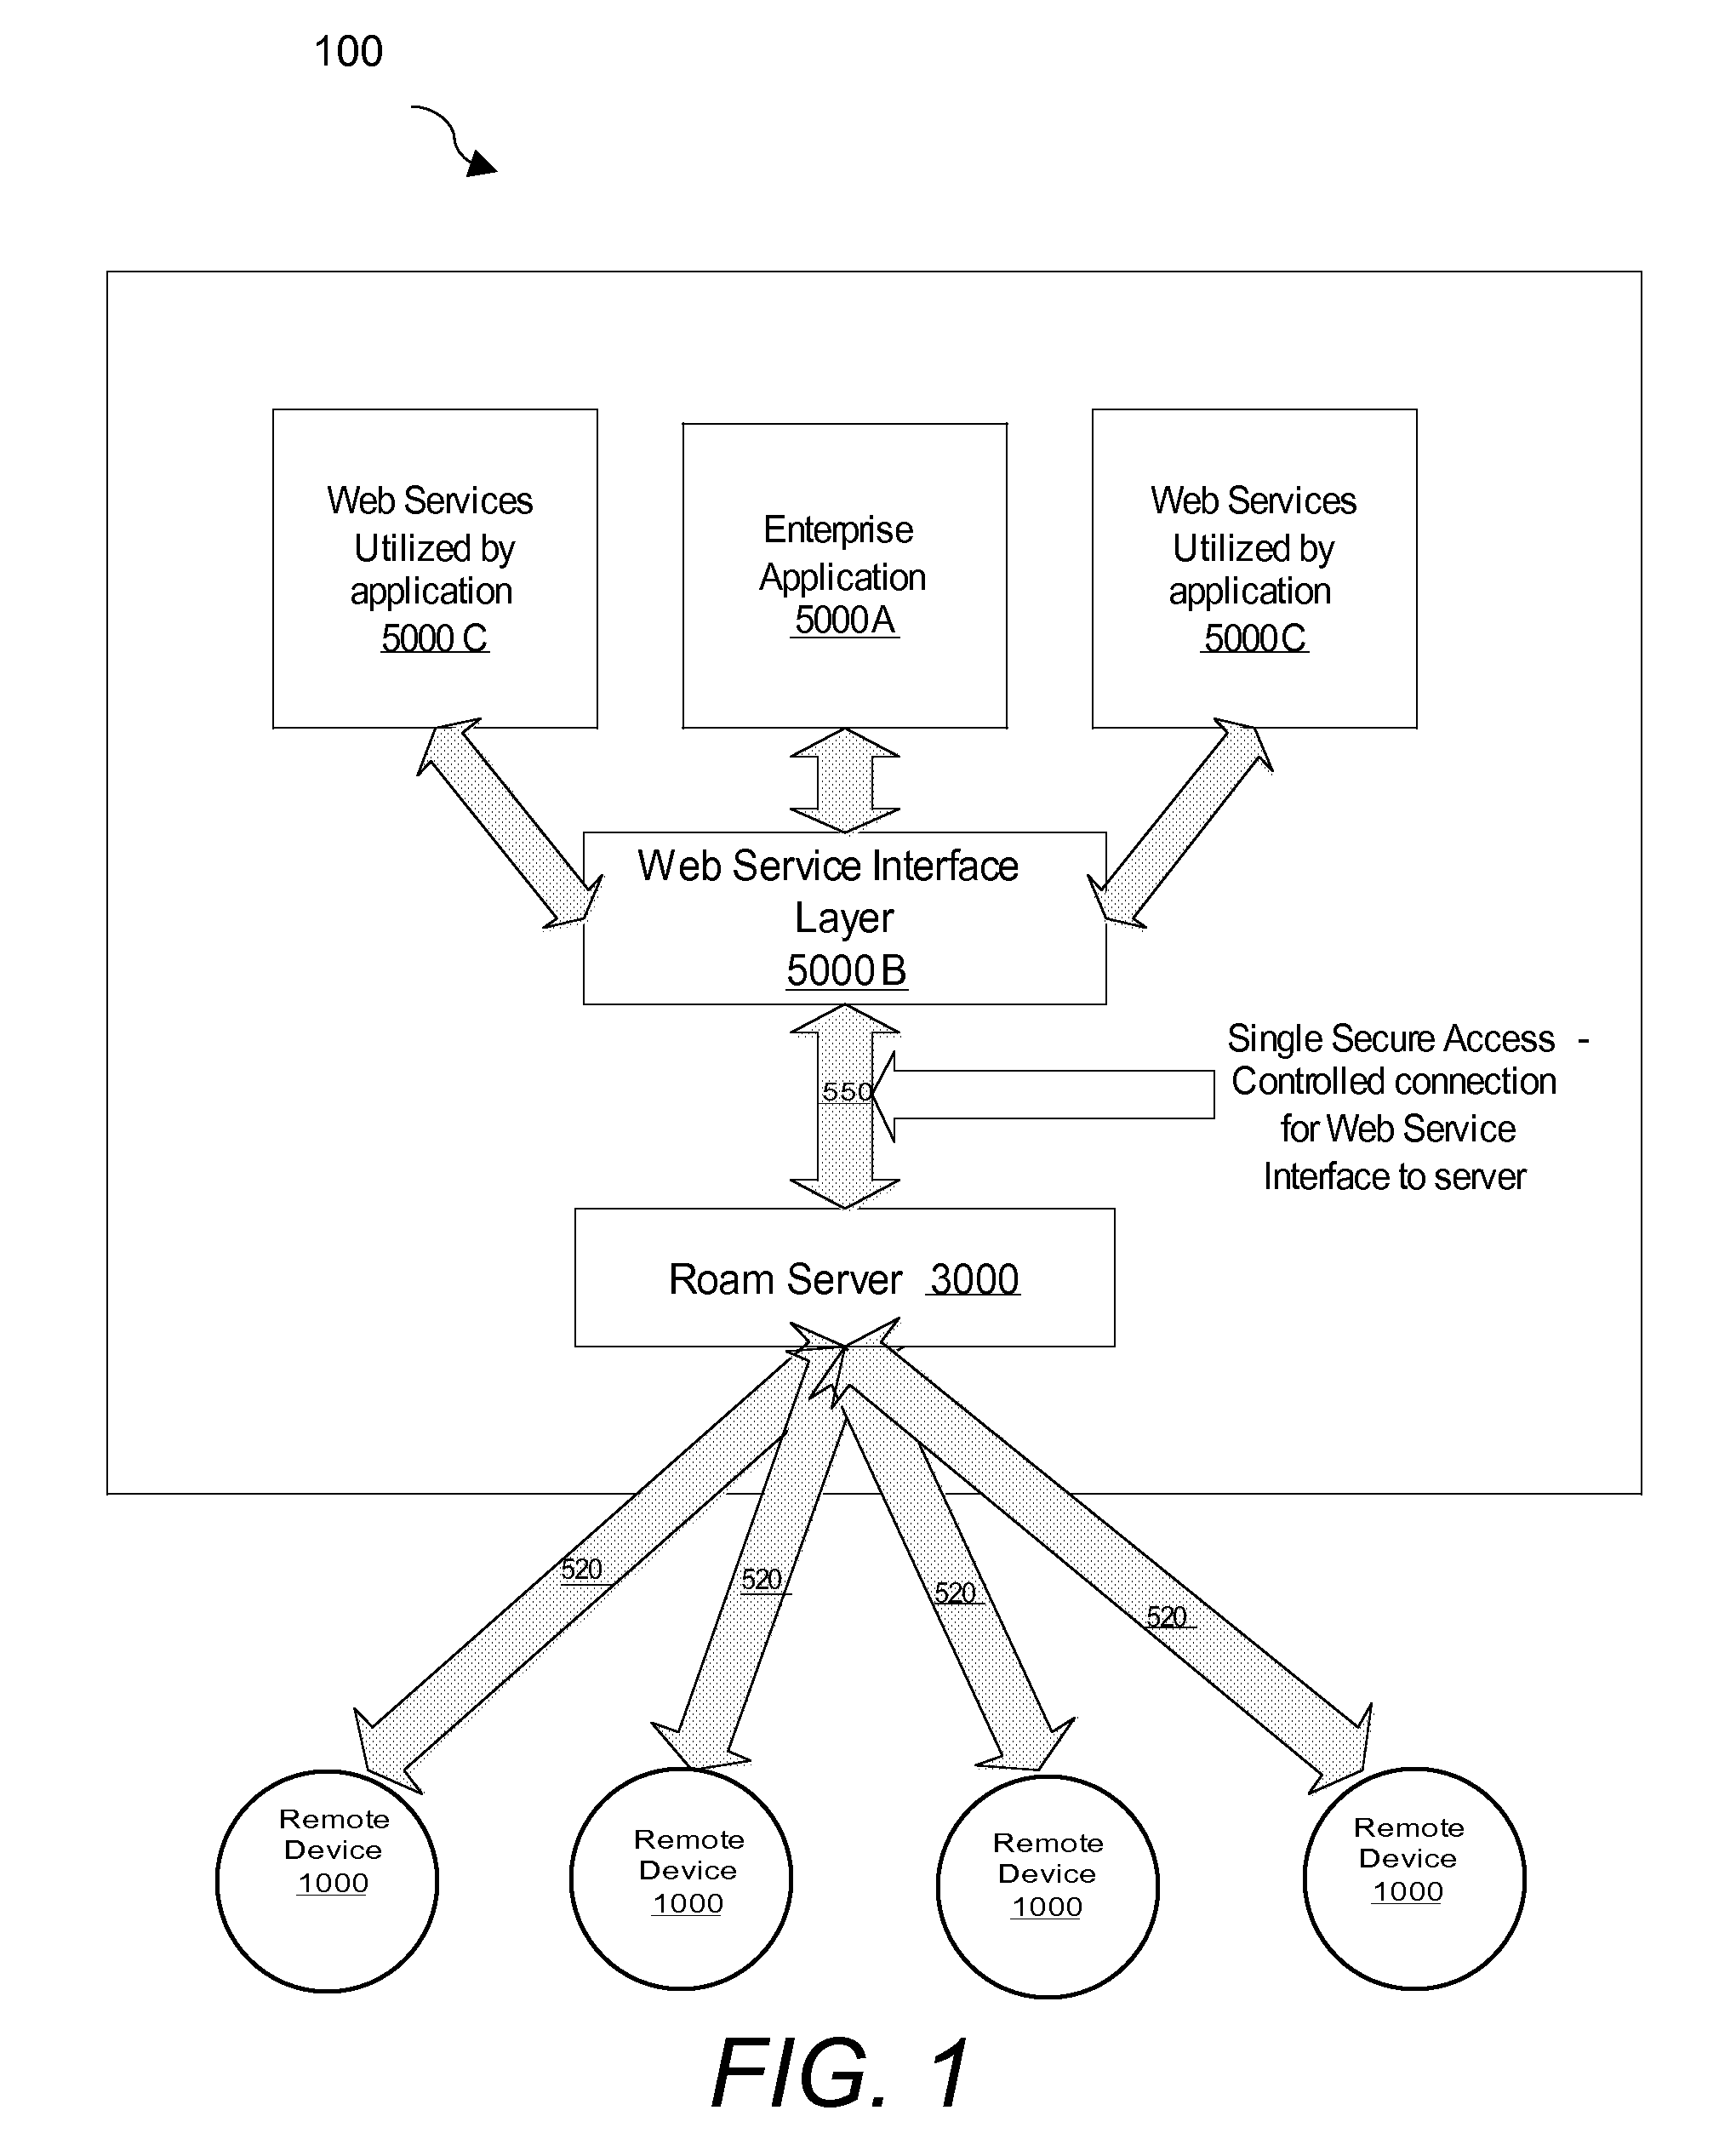 System and method for developing rich internet applications for remote computing devices